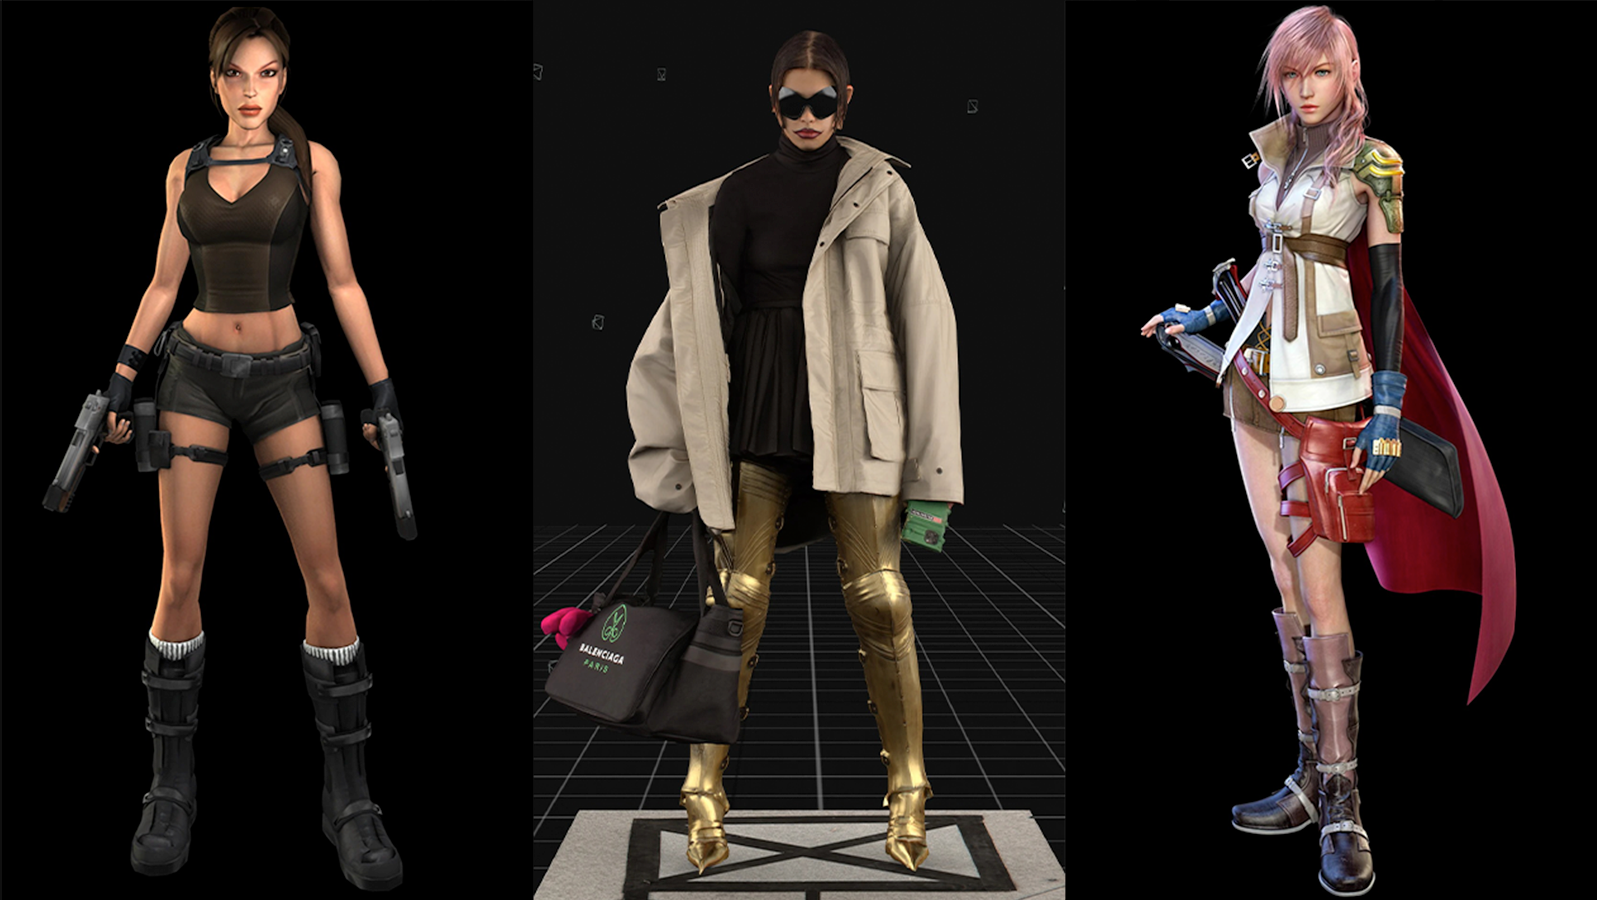 THE BEST (and worst) OF GAMING FASHION 